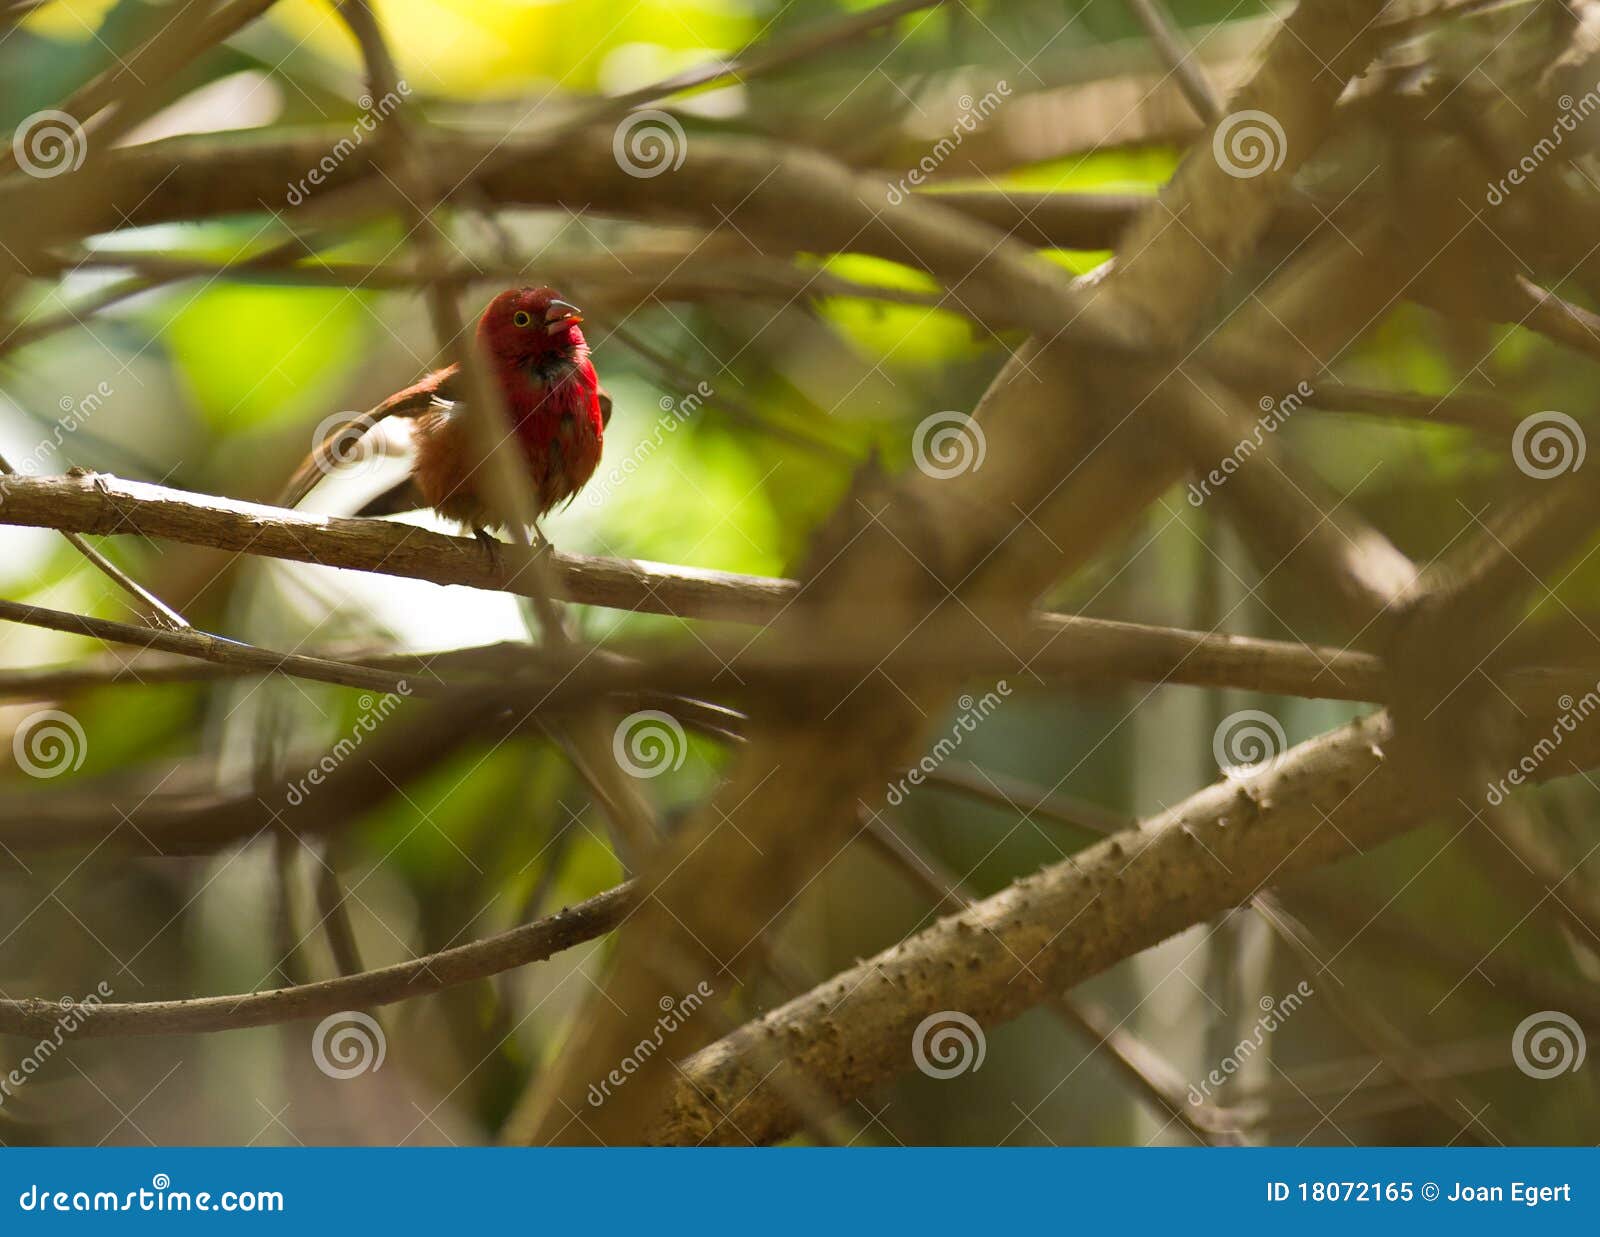 A male Red-billed Fire Finch after a bath. A Red-billed Fire Finch cleans itÂ´s feathers after having a bath in one of the numerous rainwater pools of the Gambian forest.